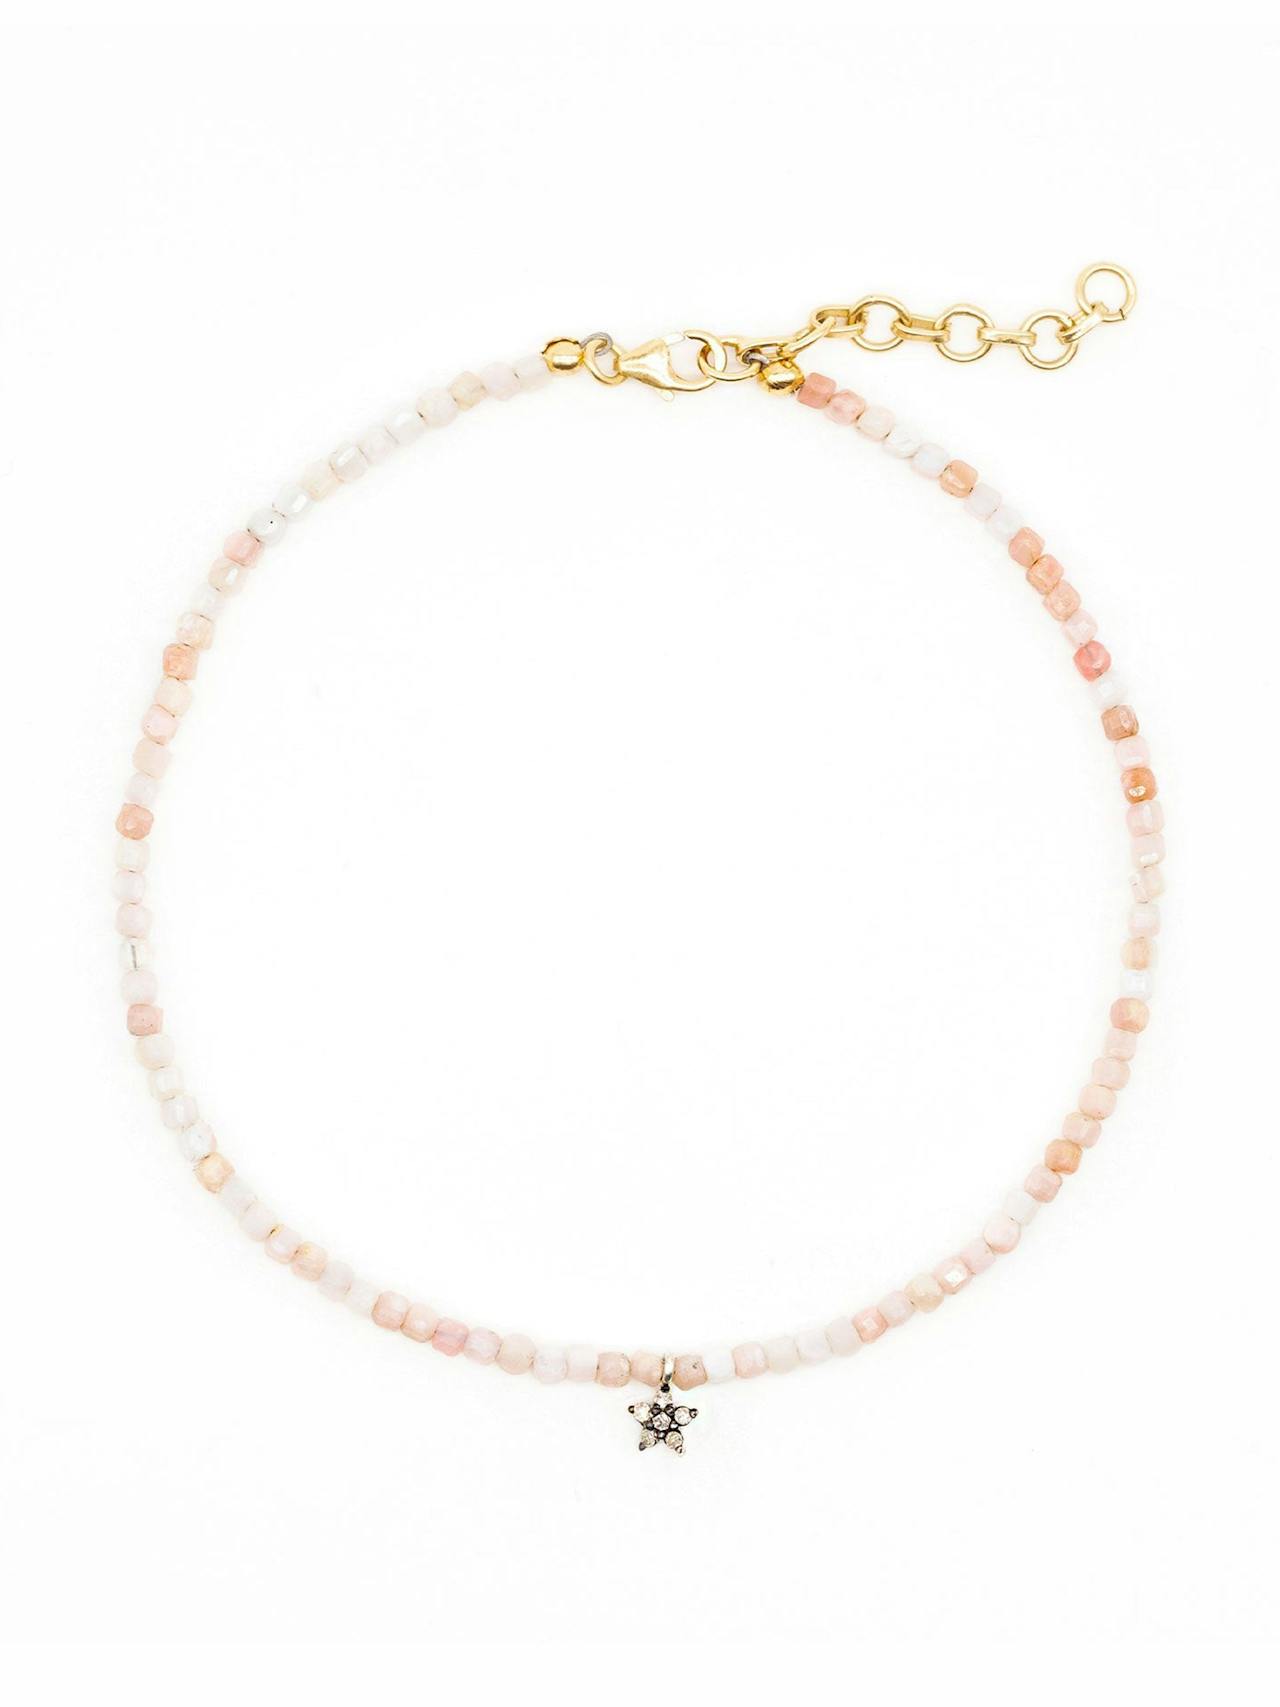 Diamond daisy and pink opal beaded anklet